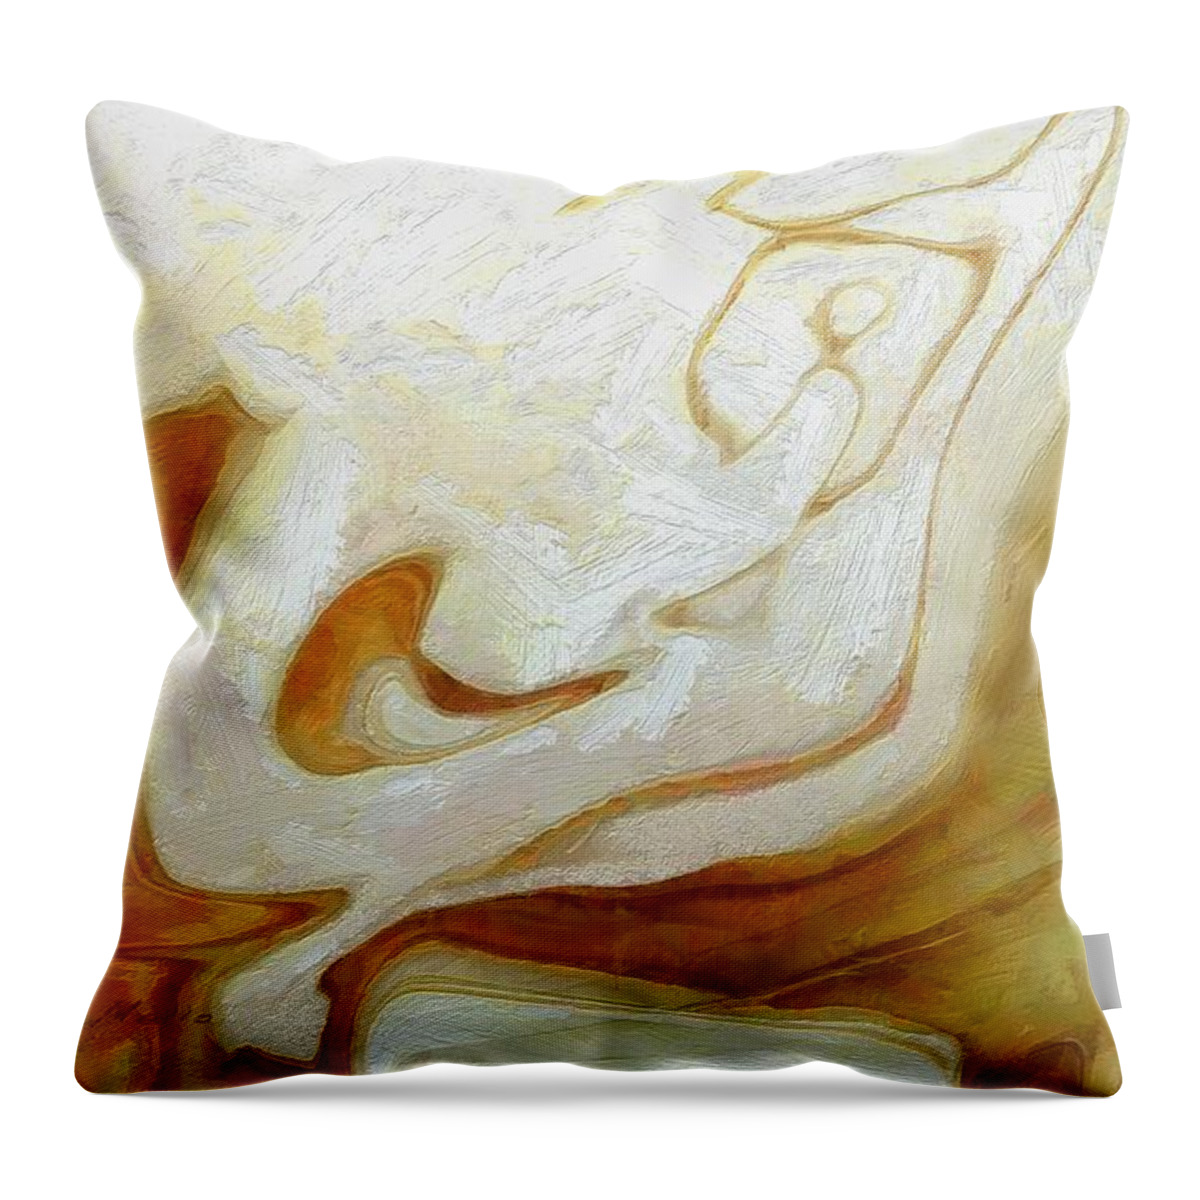 Abstract Throw Pillow featuring the painting Abstract No. 21 by Lelia DeMello